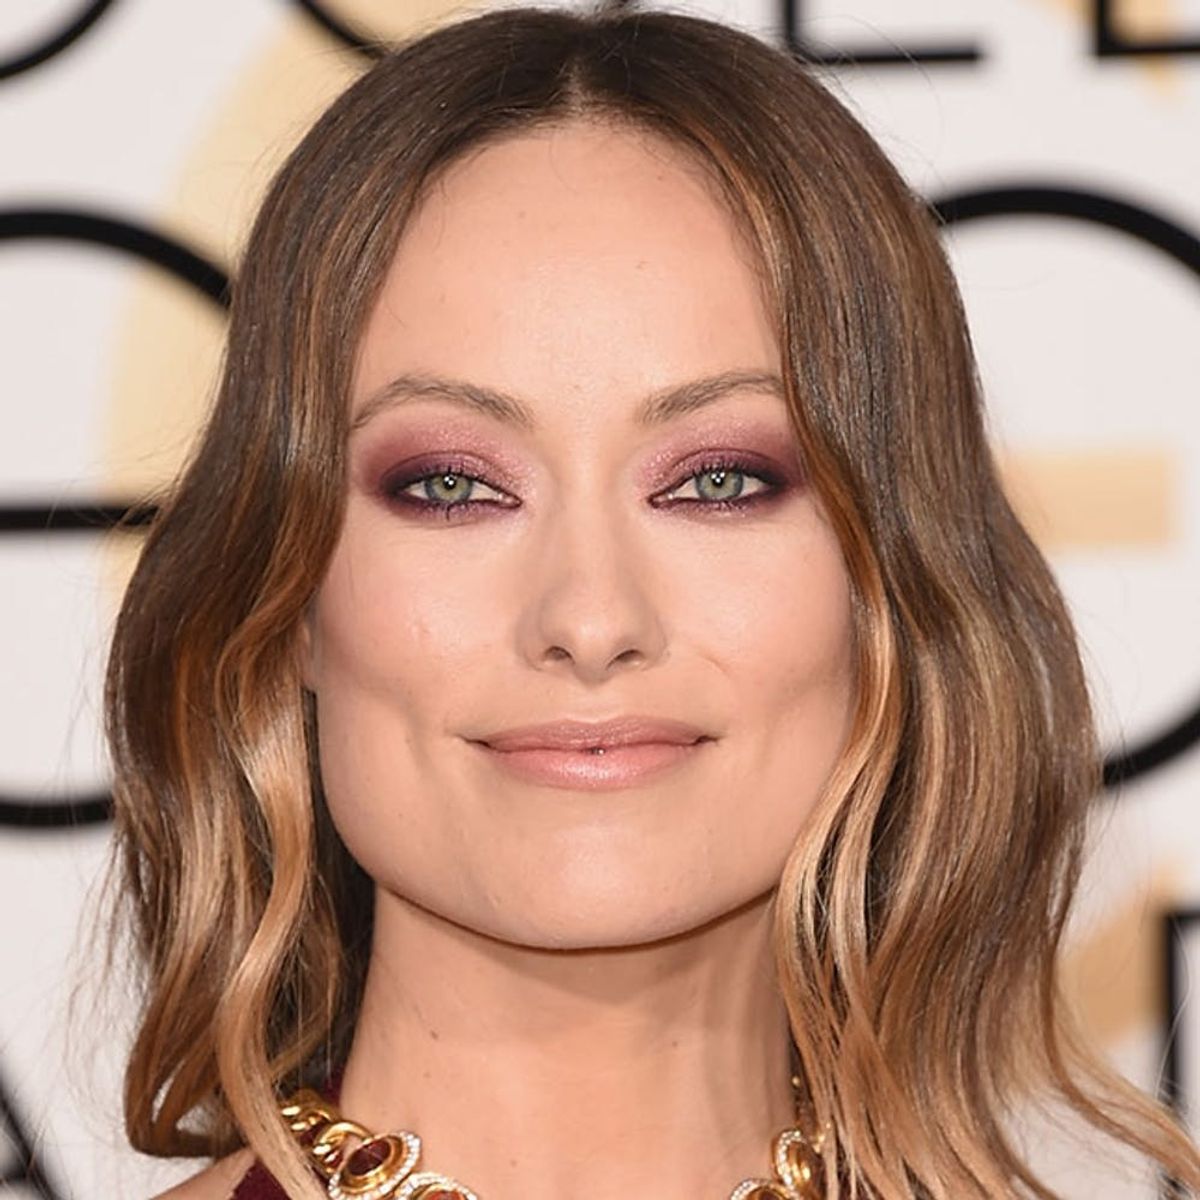 9 of the Most Beautiful Golden Globes Makeup Looks You’ll Want to Try